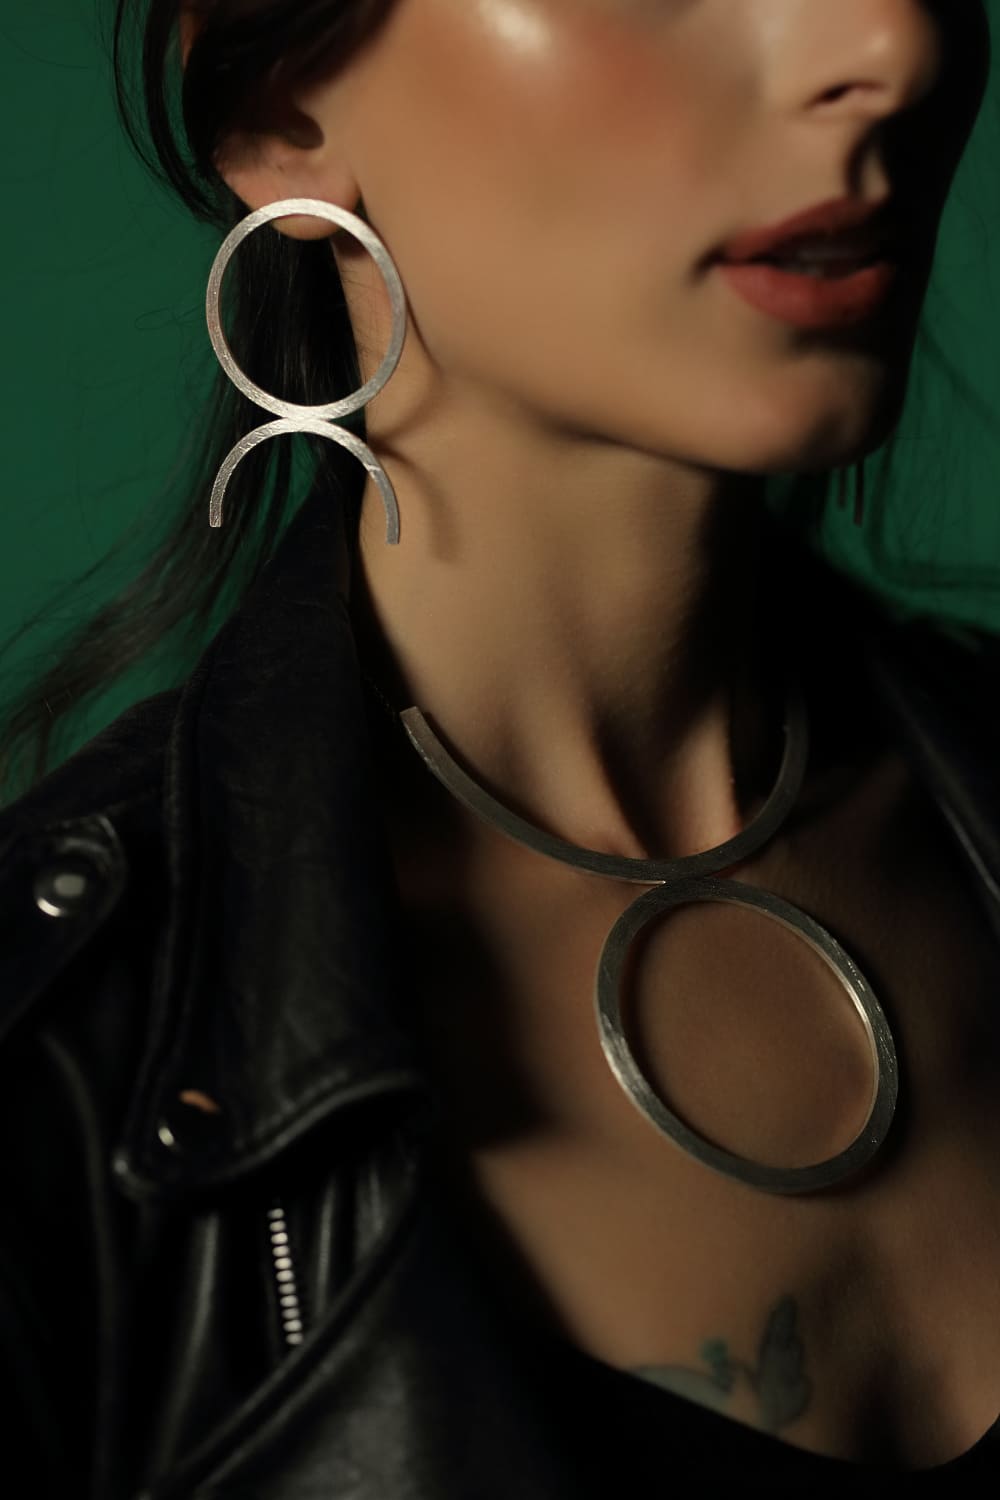 Taurus Earrings - Fully handmade in Sterling Silver 925. Contemporary unique designs of limited edition by Mystic J.